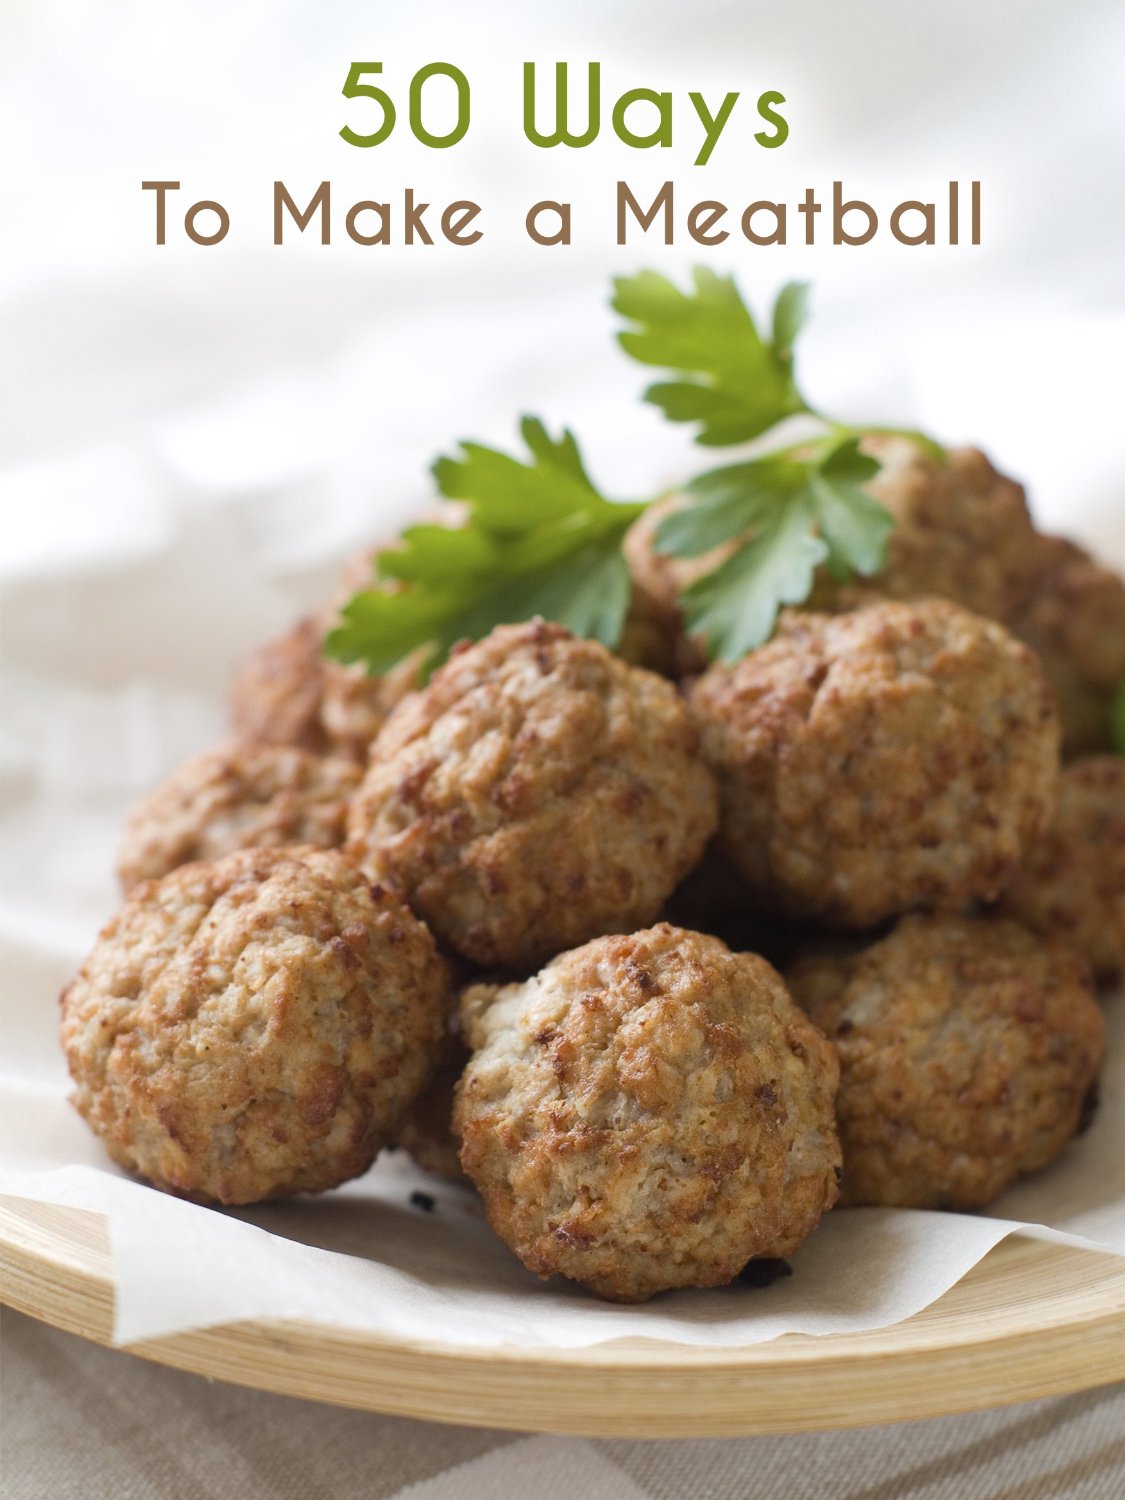 50 Ways To Make A Meatball: The 50 Most Delicious Meatball Recipes